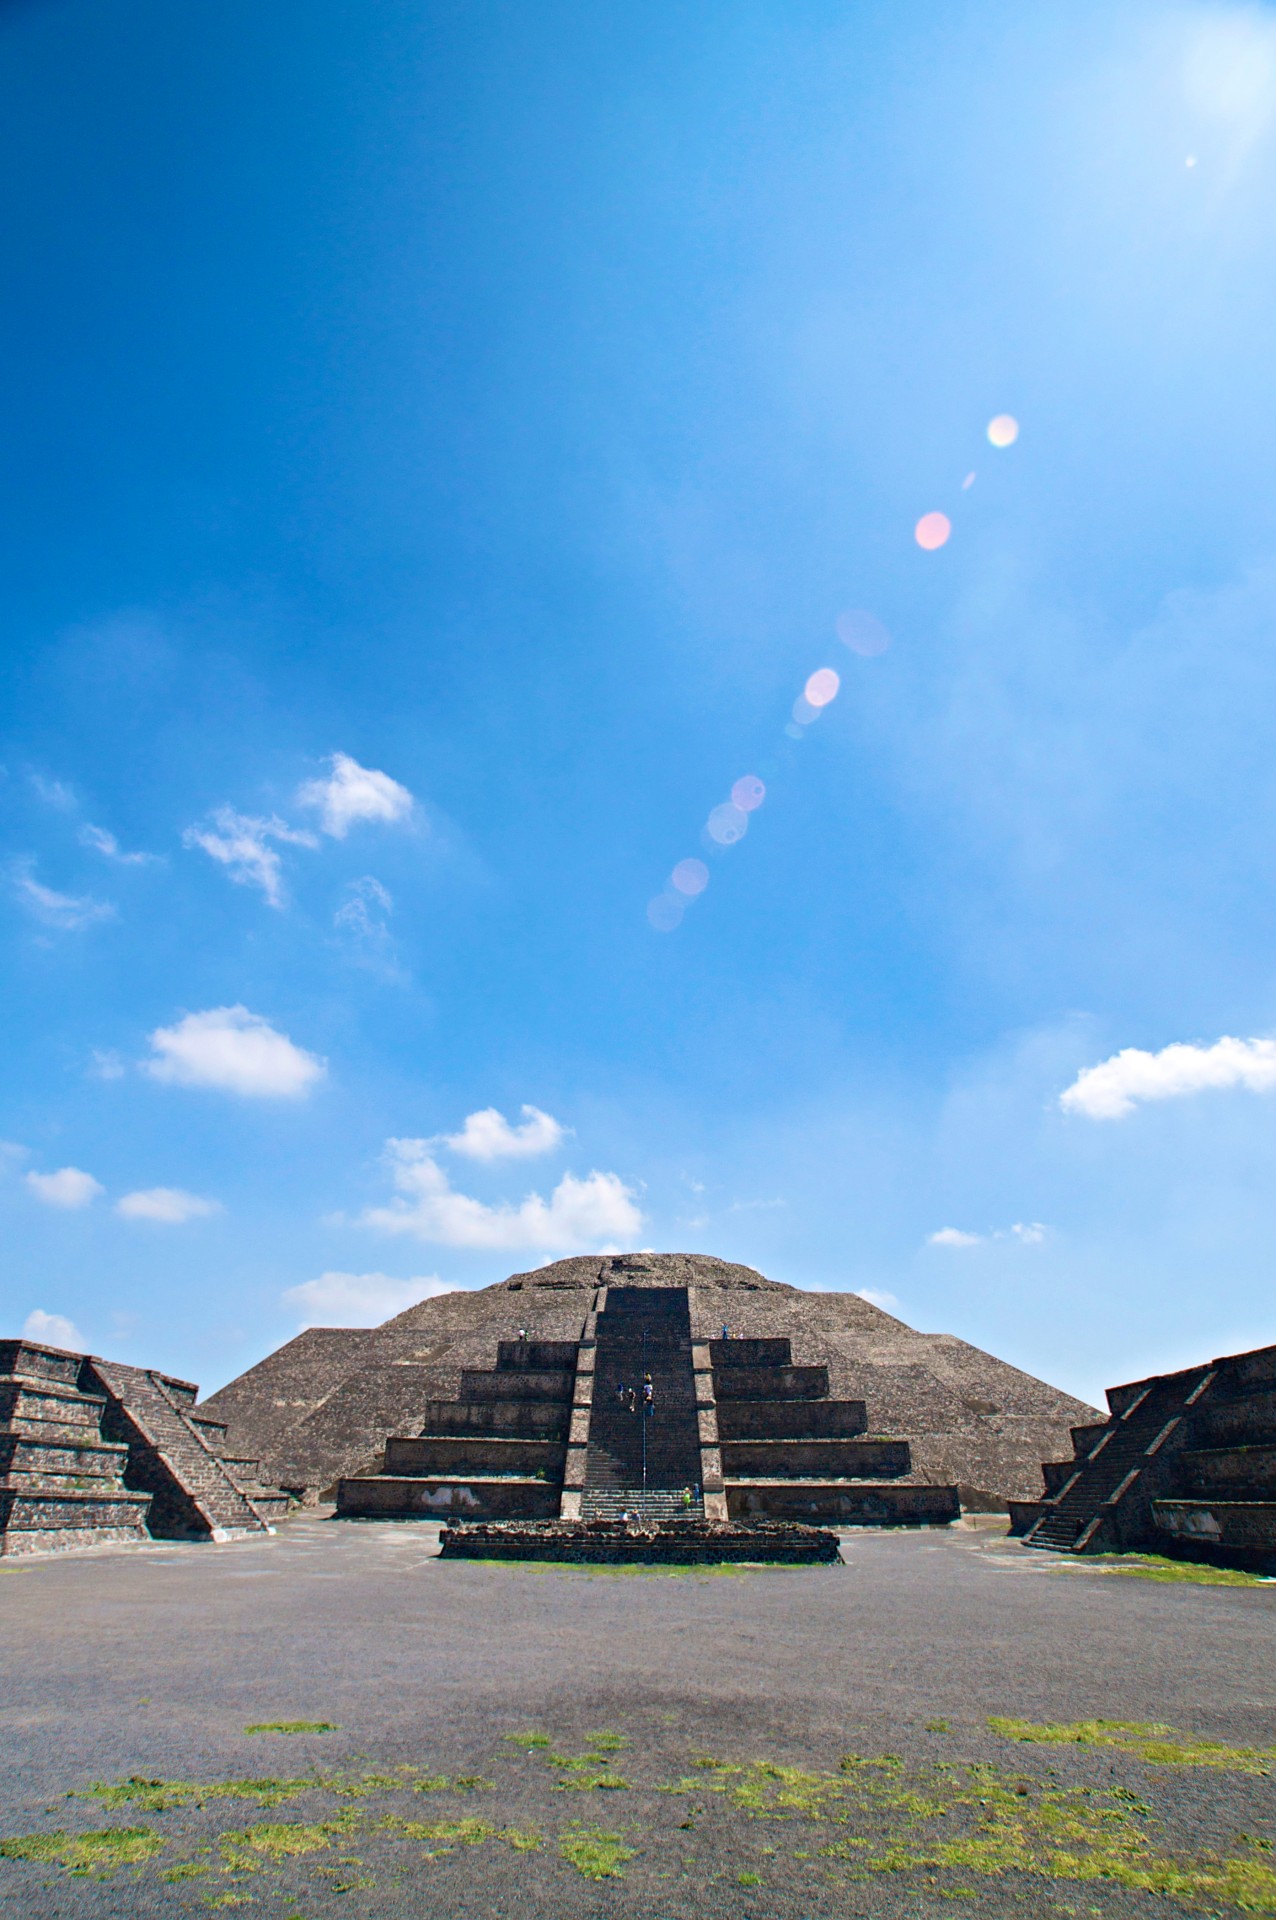 Single beam of sun falls on Aztec temple of the moon in Mexico, Latin America.